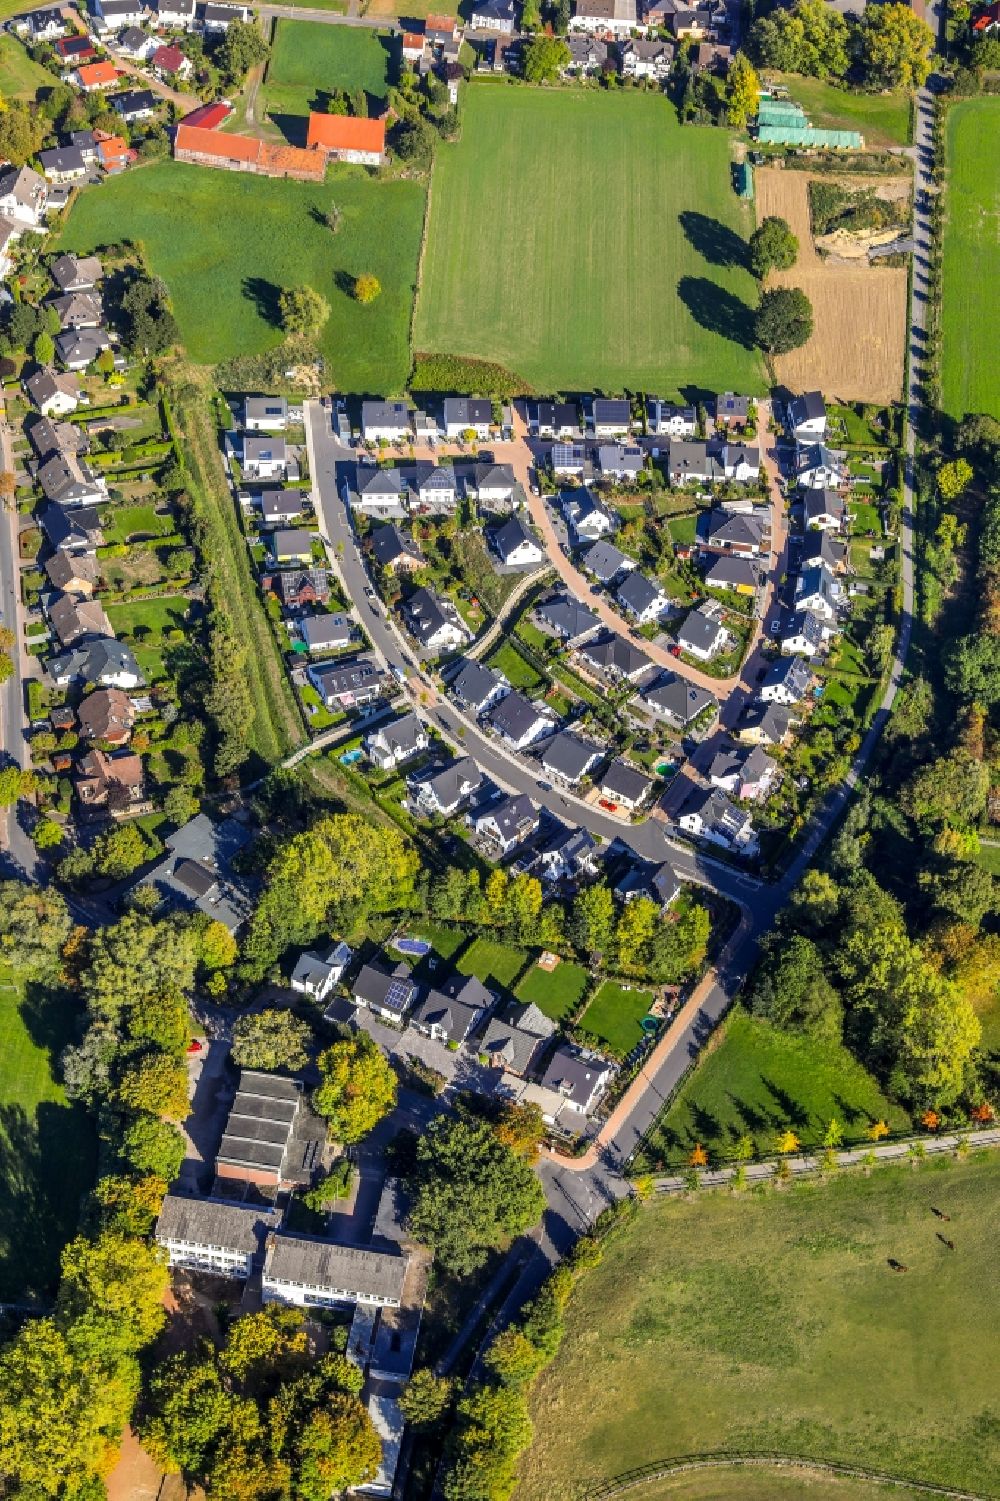 Unna from above - Single-family residential area of settlement on Lange Jupp Weg - Hermann-Osthoff-Strasse - Liedbachstrasse in Unna in the state North Rhine-Westphalia, Germany